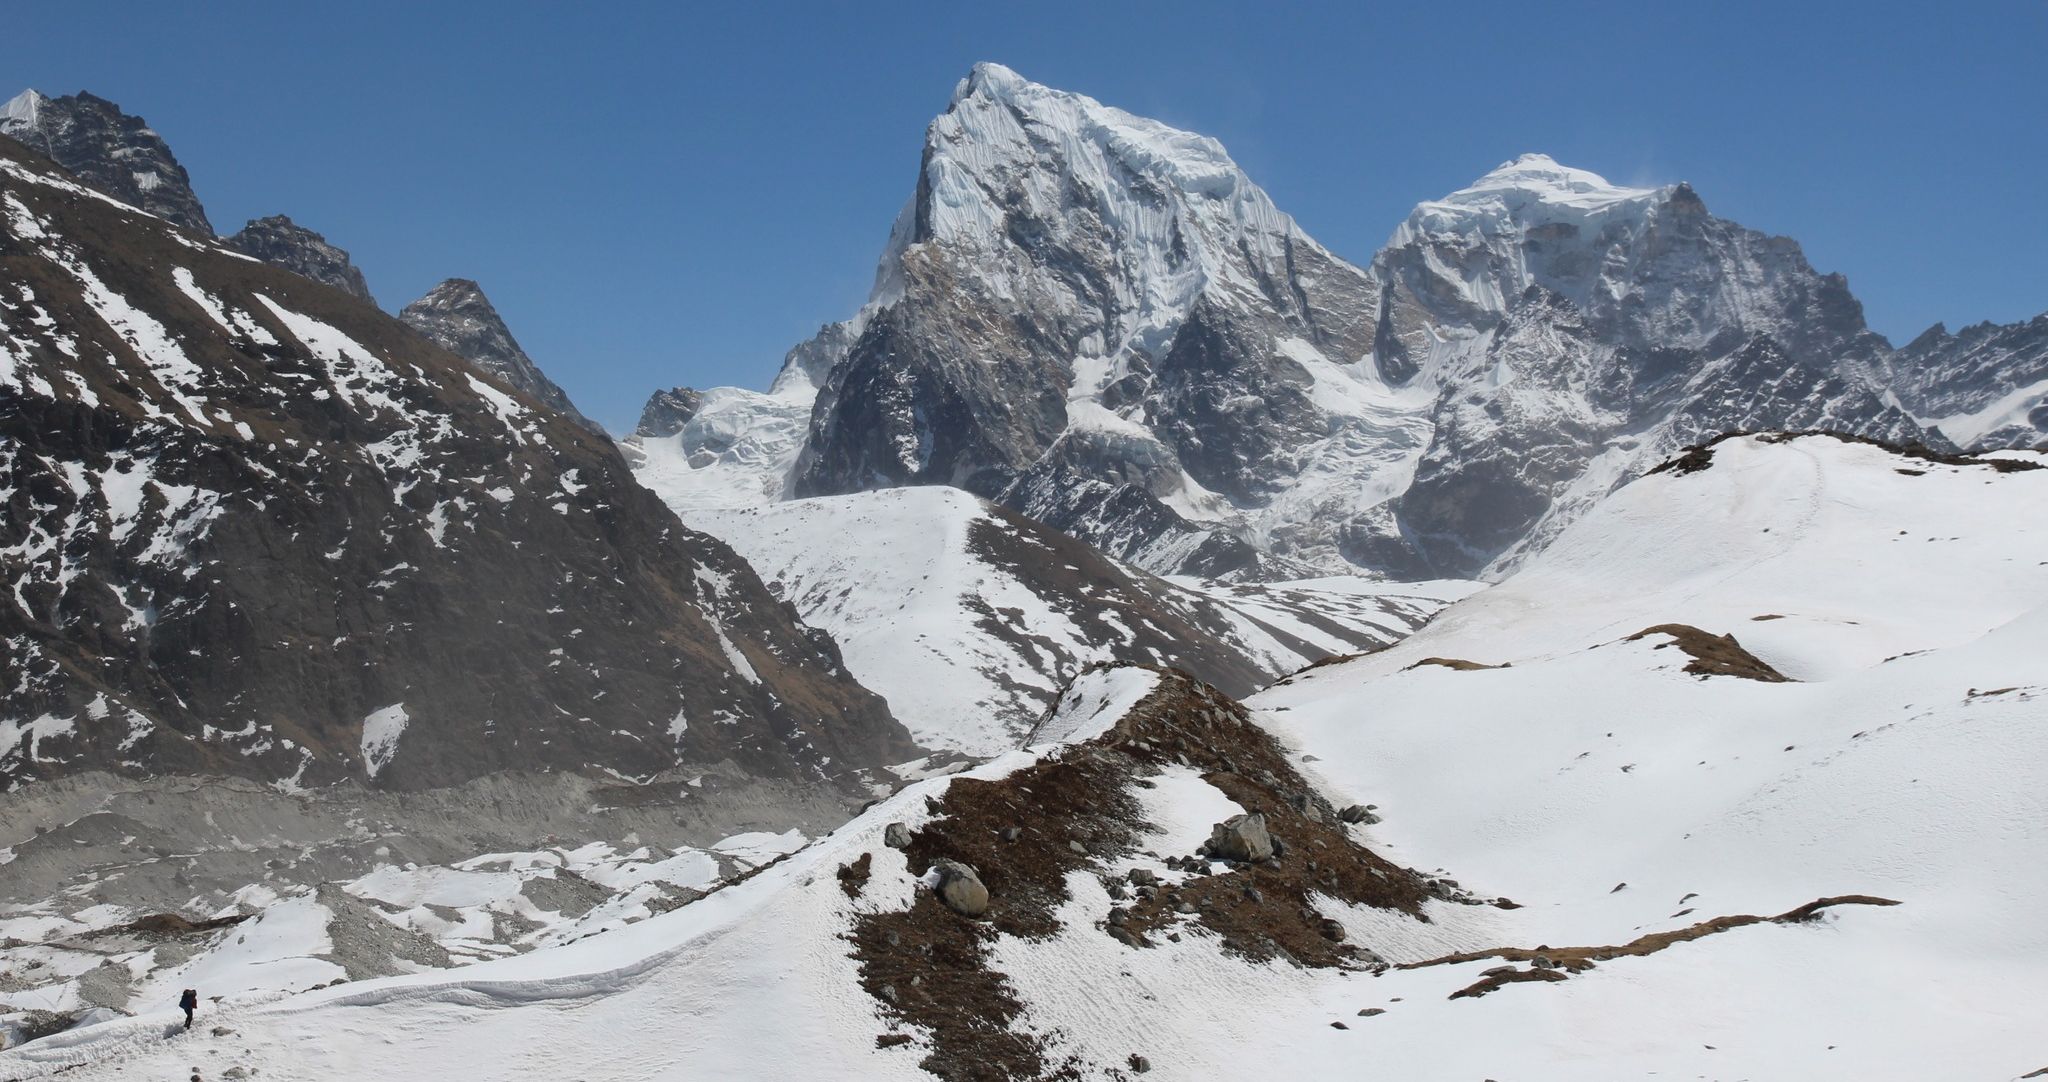 Mount Cholatse ( 6440m ) and Taboche above the Ngozumpa Glacier in the Gokyo Valley